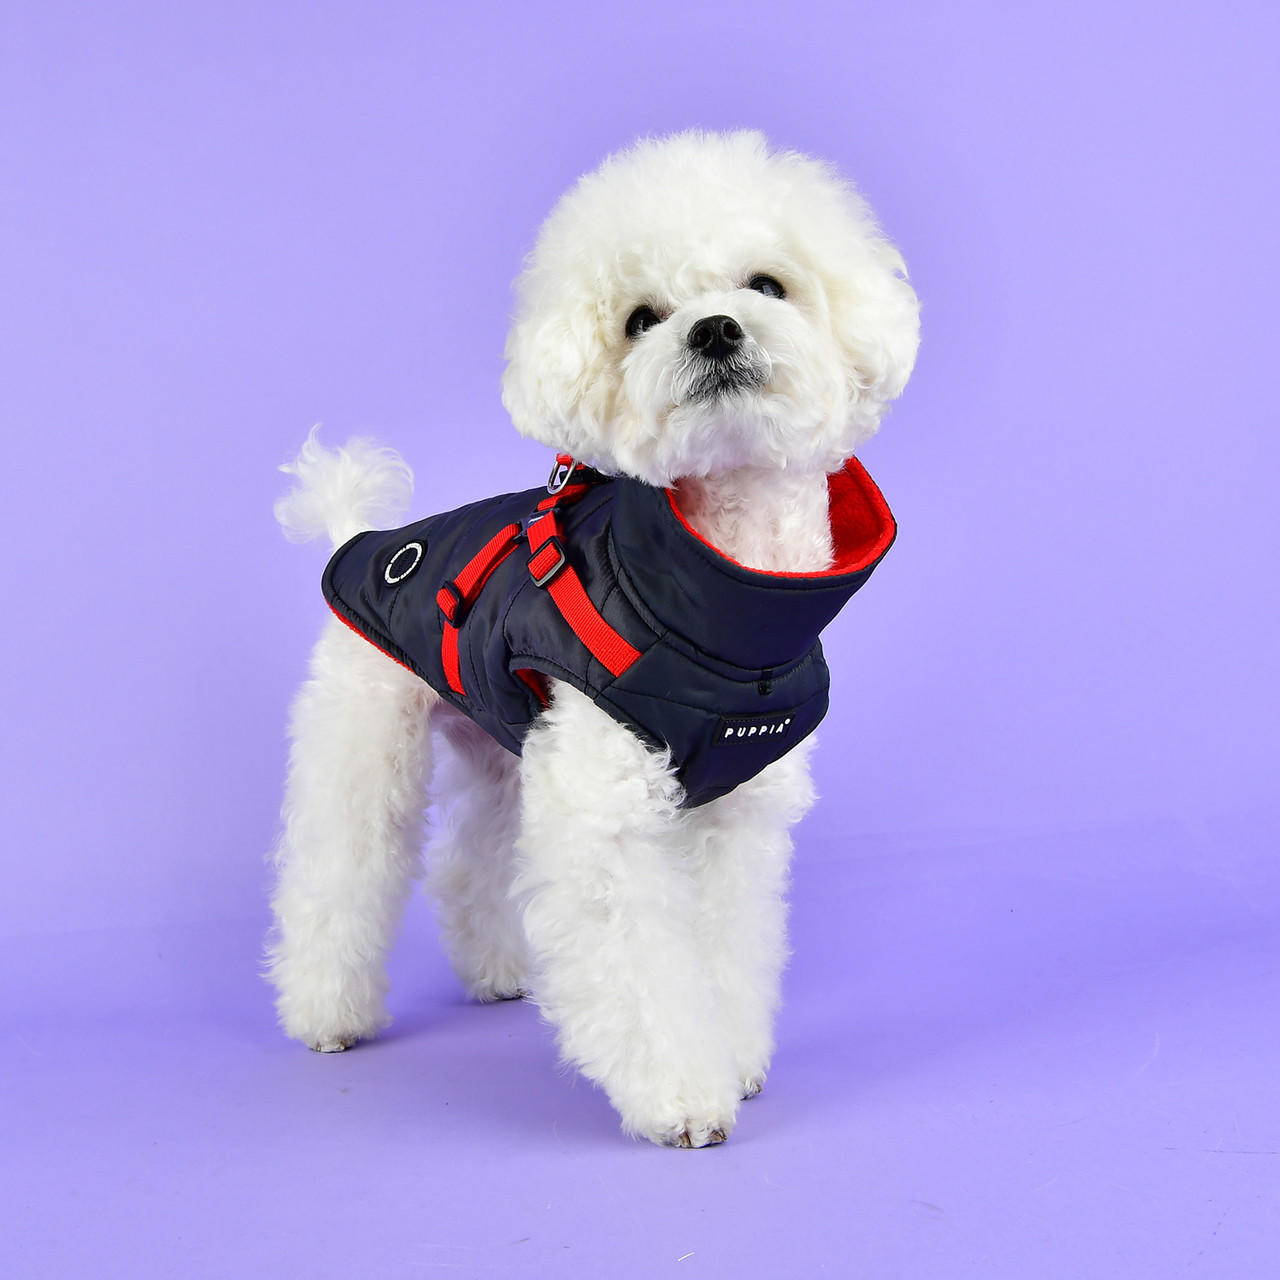 Dog Clothes, Dog Harnesses & Dog Outfits